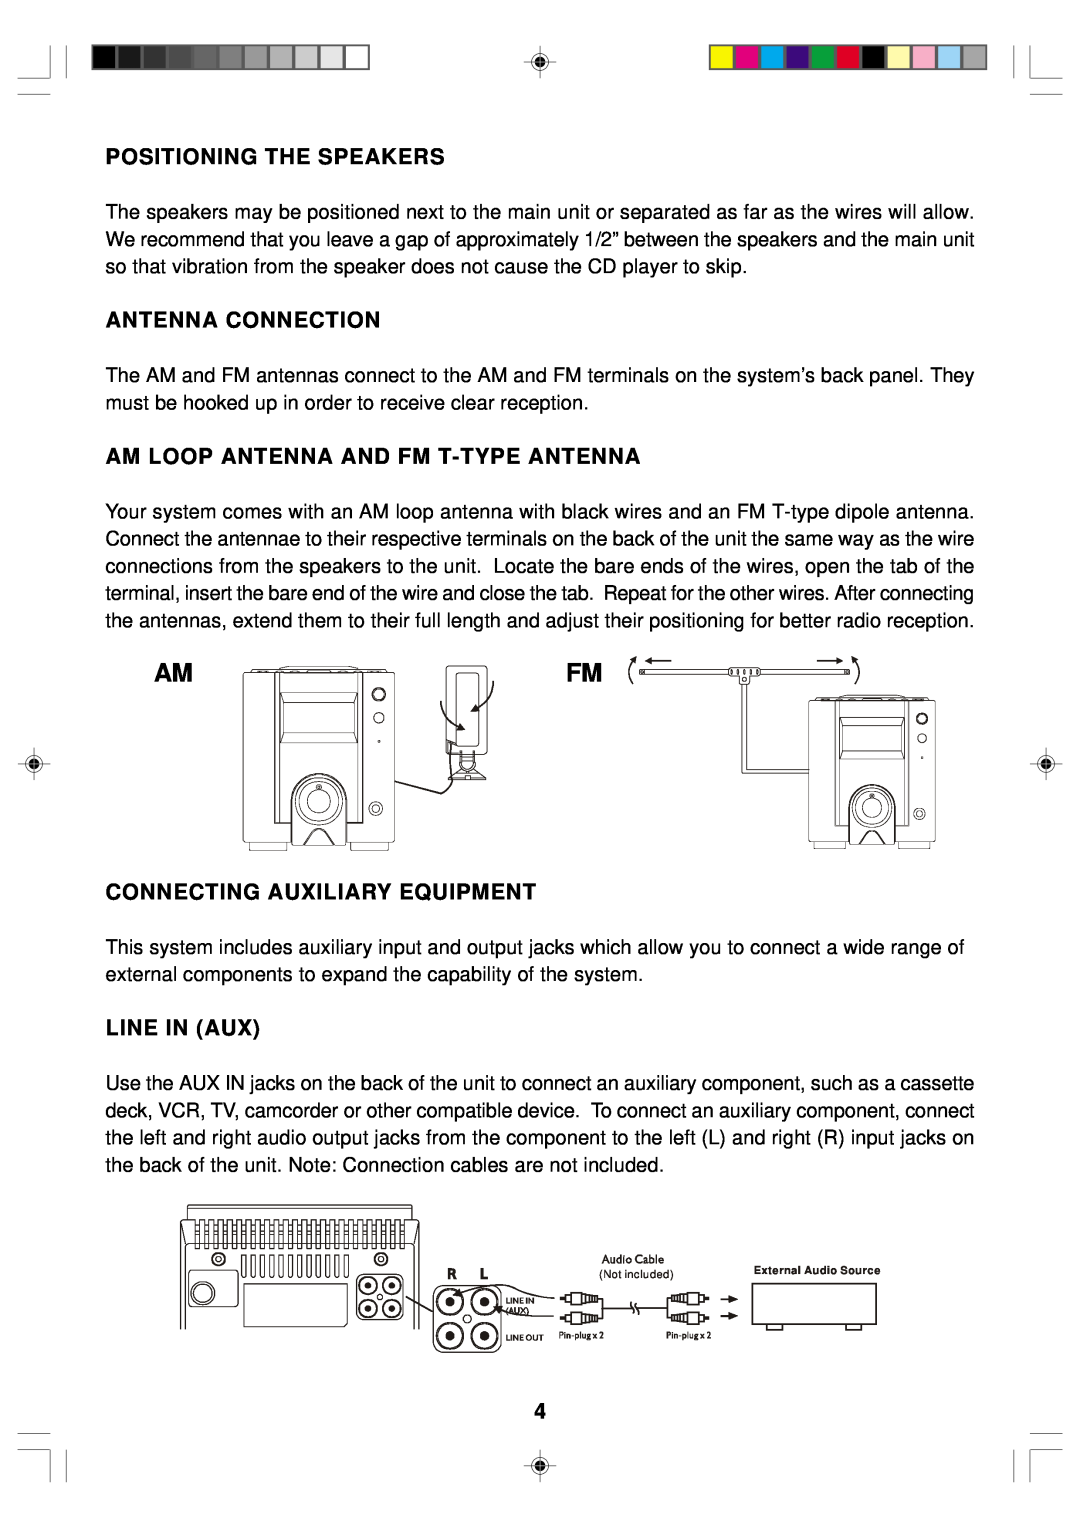 Emerson ES1 owner manual Positioning The Speakers, Antenna Connection, Am Loop Antenna And Fm T-Typeantenna, Line In Aux 